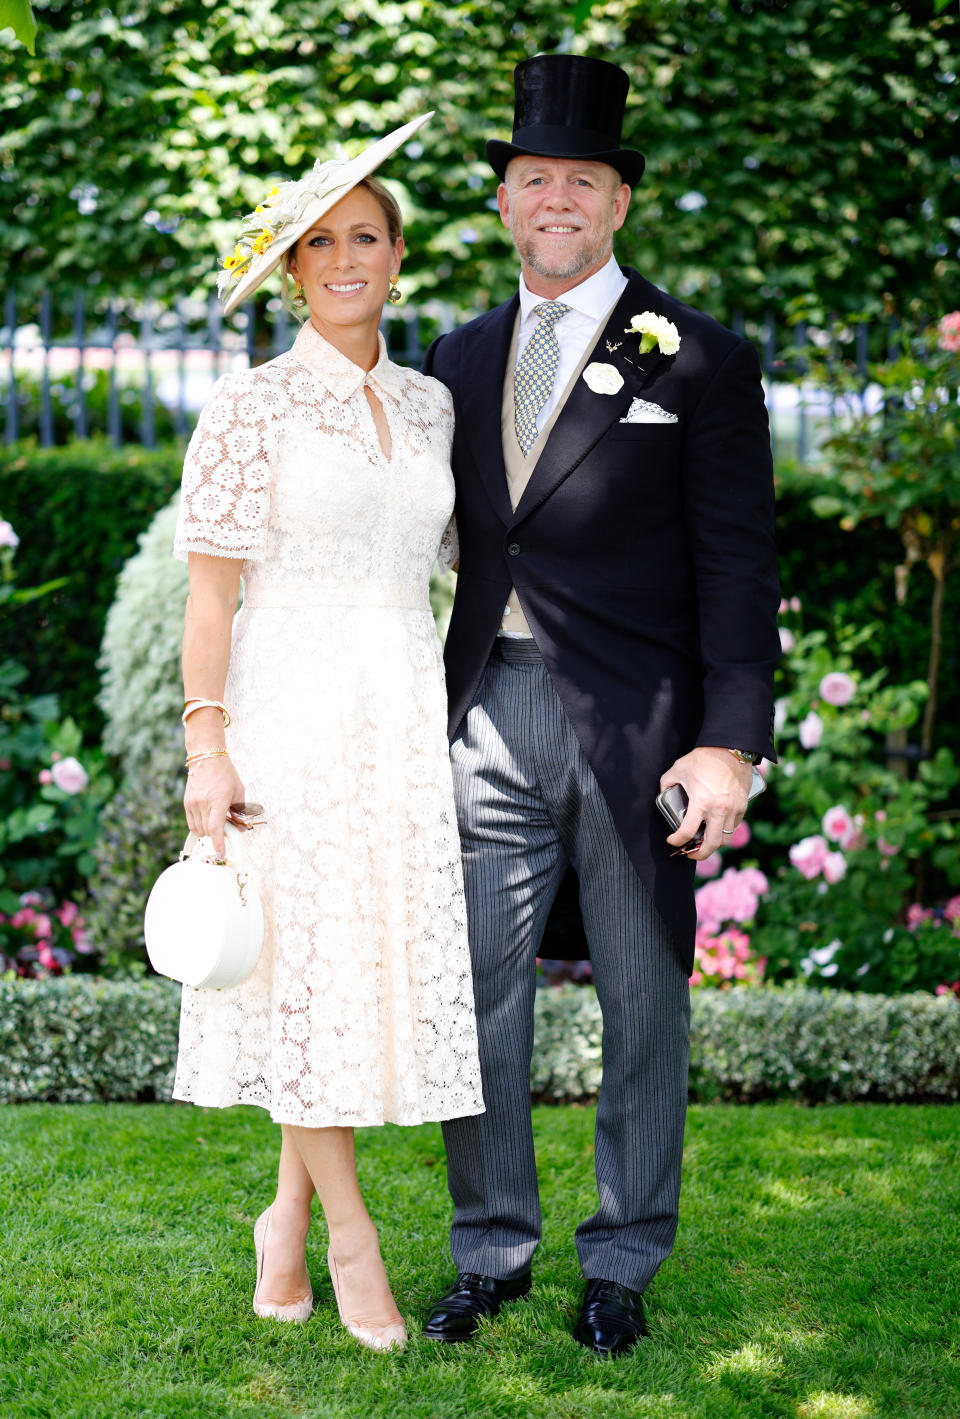 Zara Tindall and Mike Tindall attend 'Ladies Day' of Royal Ascot 2023. (Getty Images)